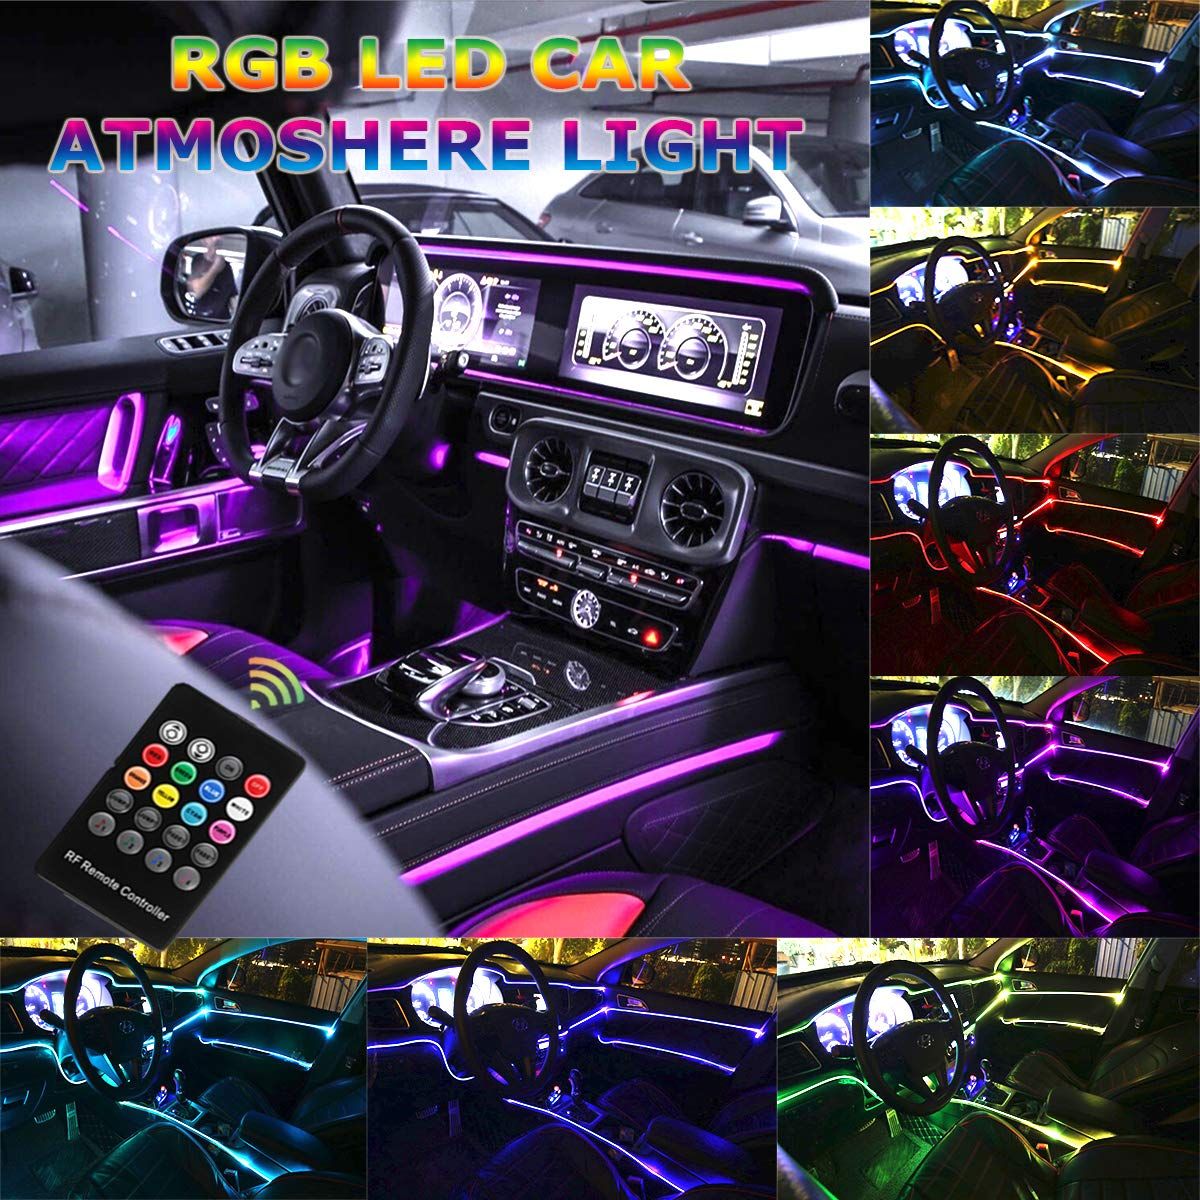 4-in-1 LED In Car Interior Atmosphere Neon RGB Music Strip Lights Remote Lamp